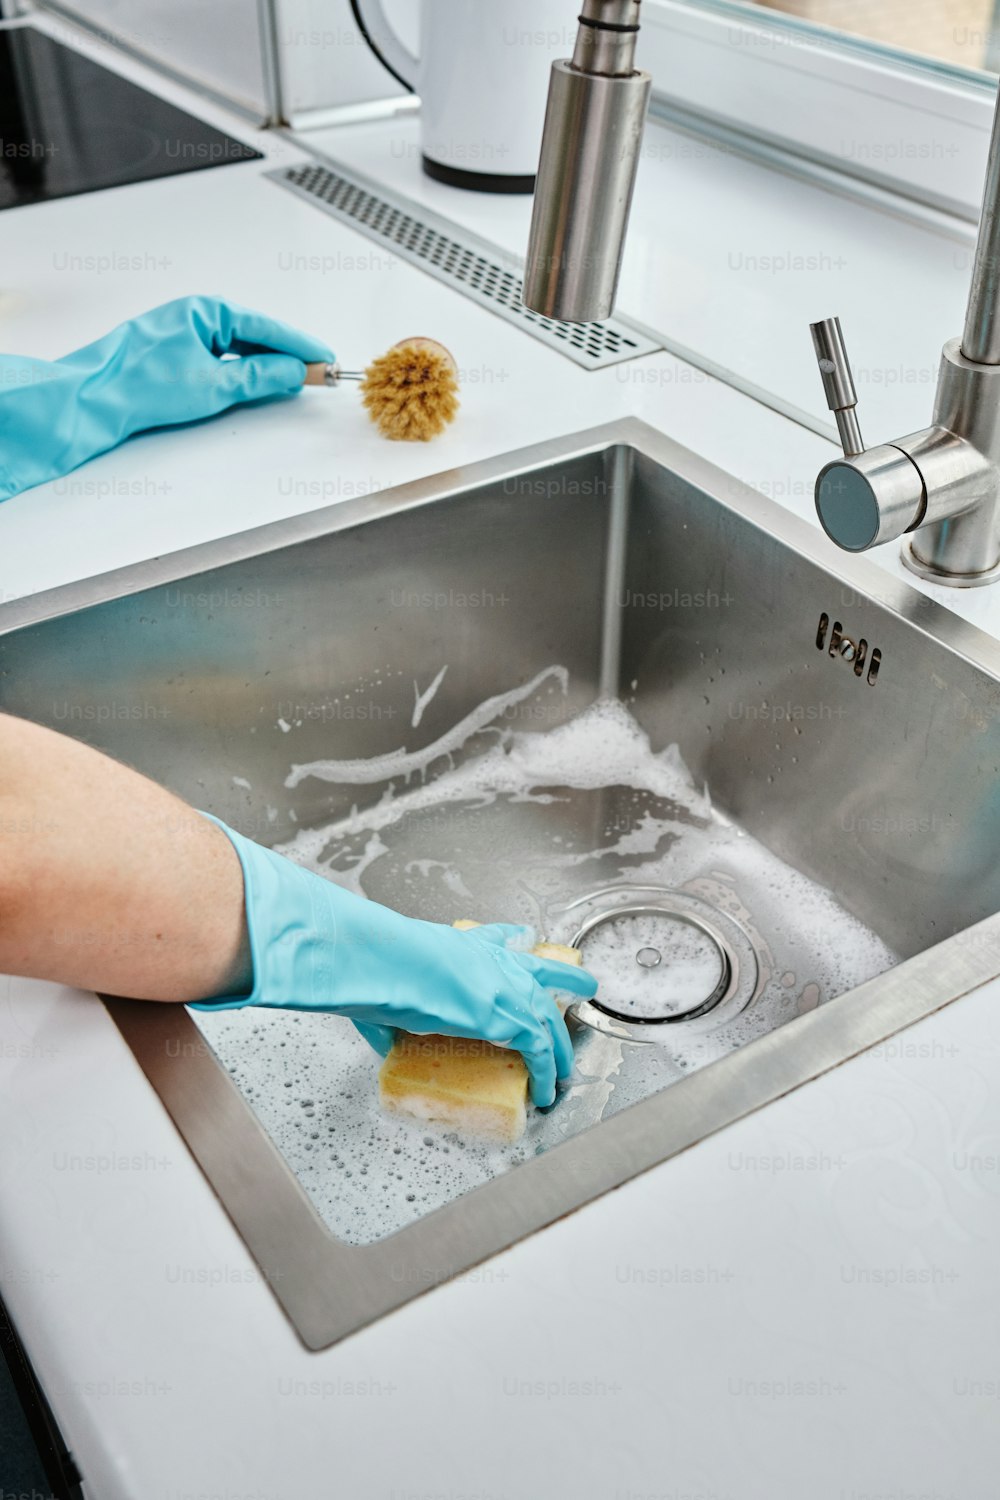 a person in blue gloves is cleaning a stainless steel sink